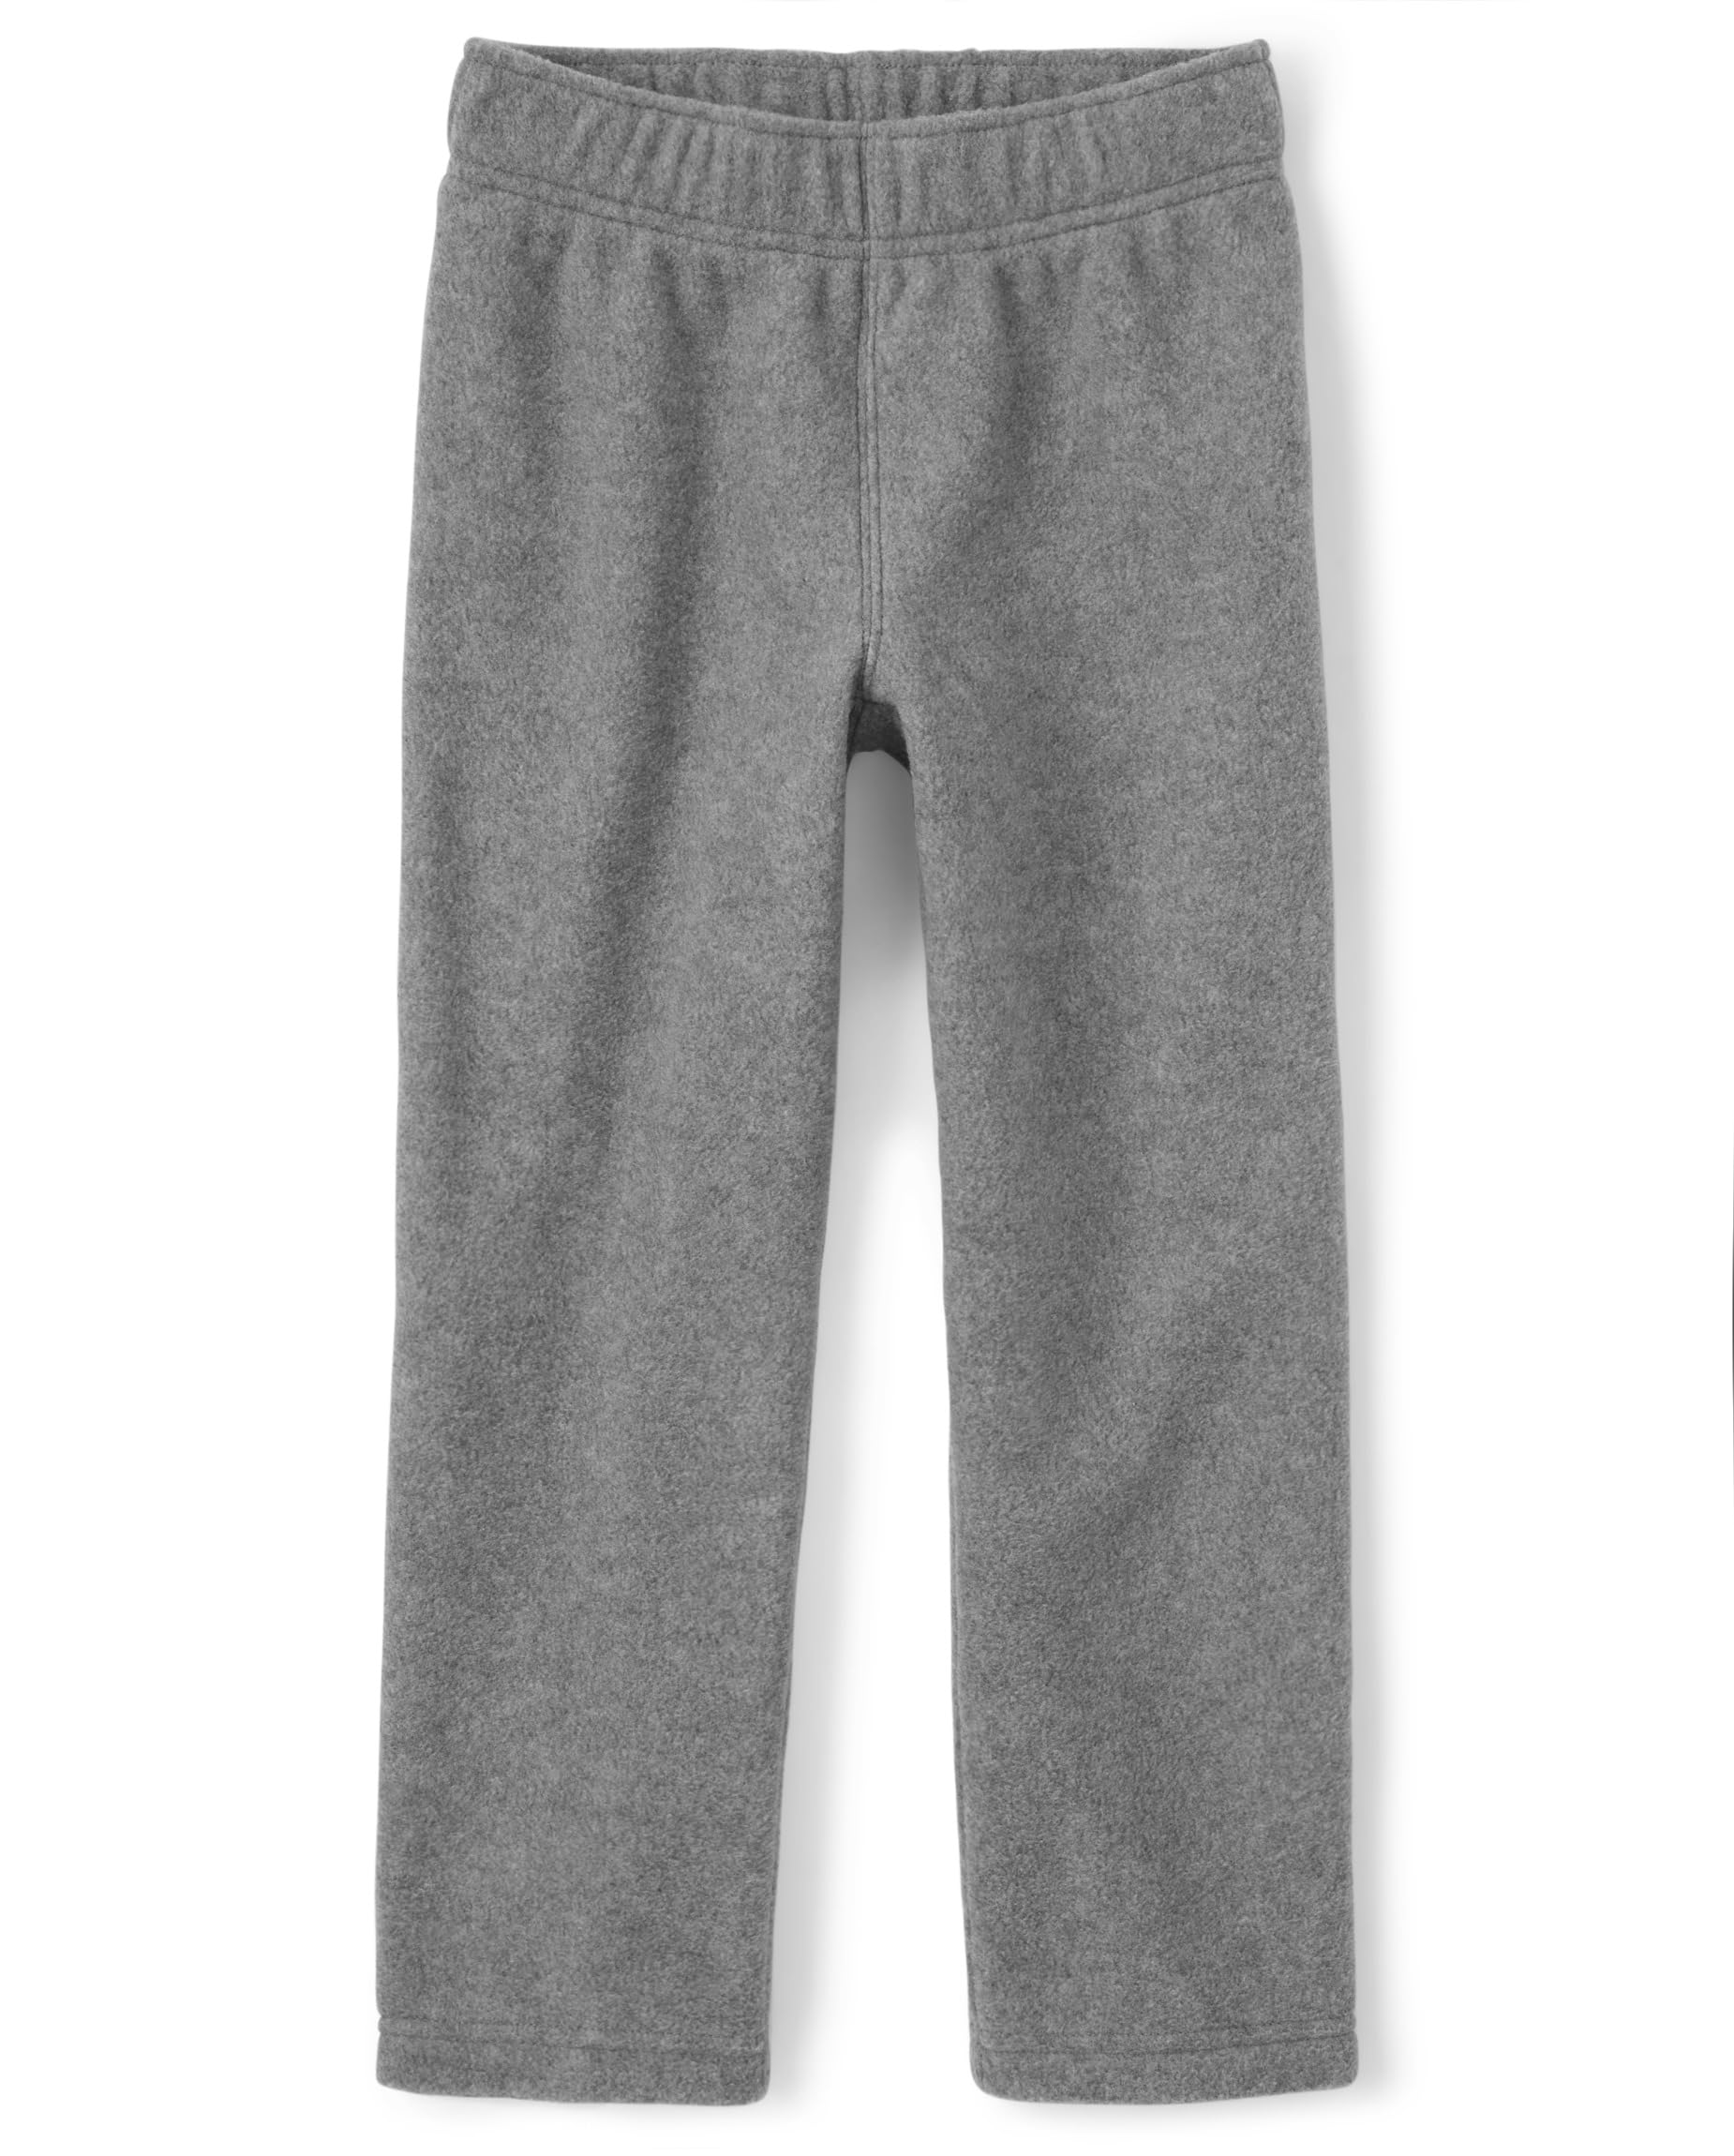 The Children's Place Boys' Warm Fleece Pull On Pants